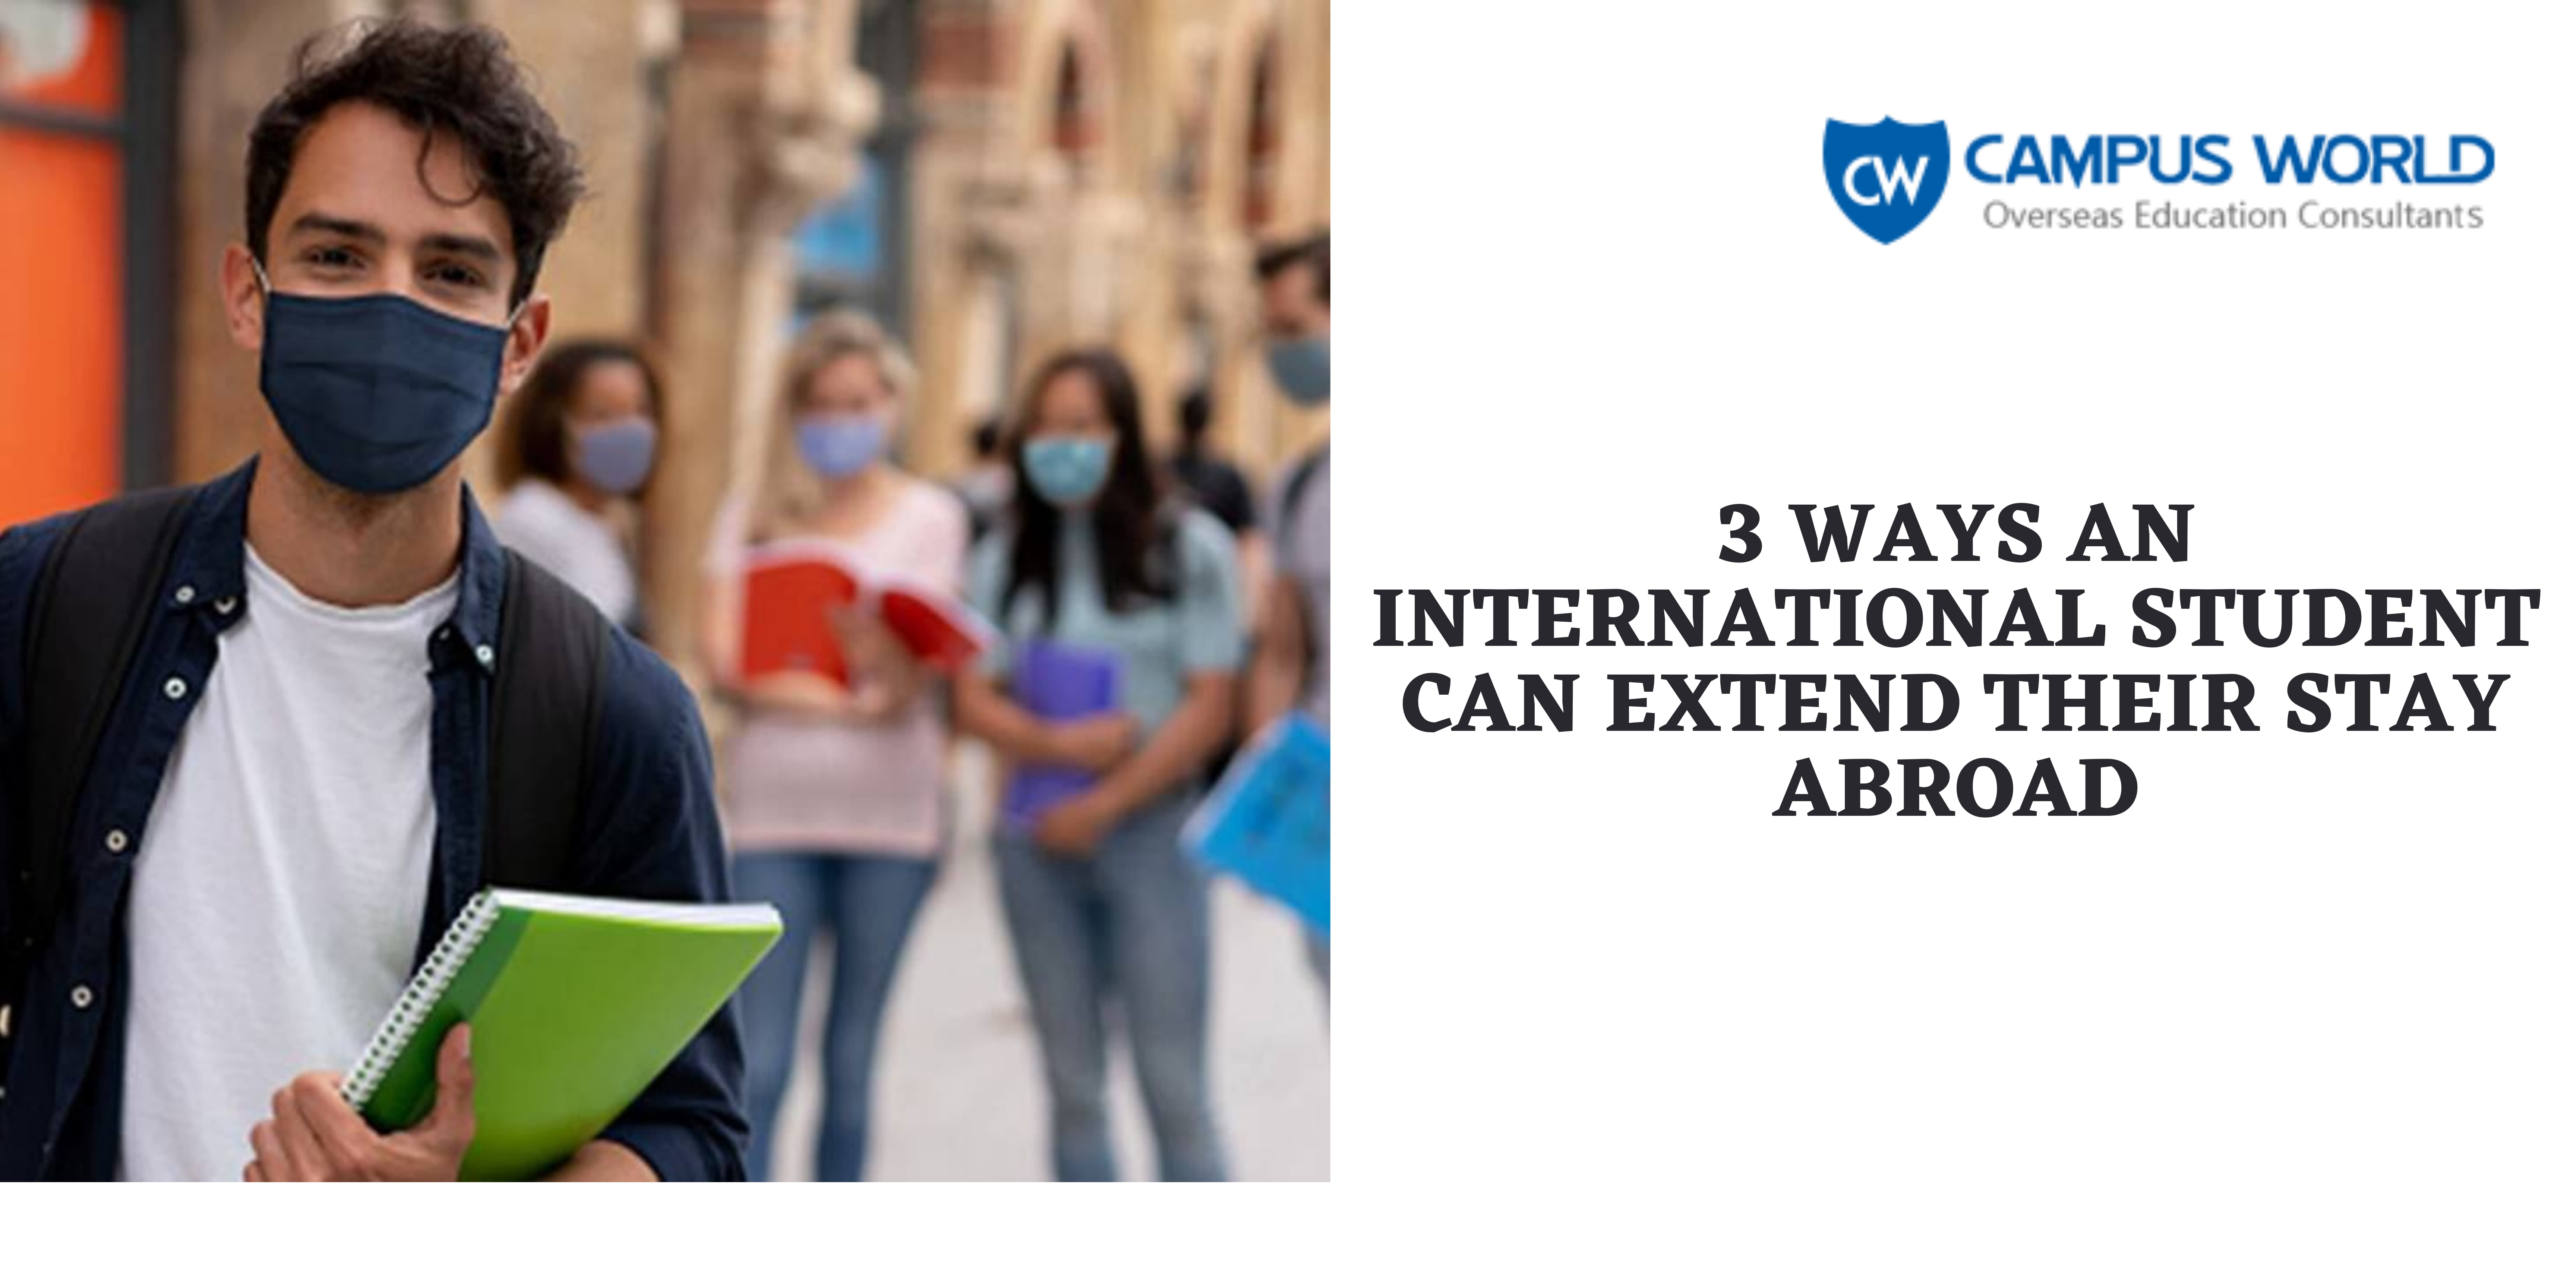 3 Ways an International Student Can Extend Their Stay Abroad